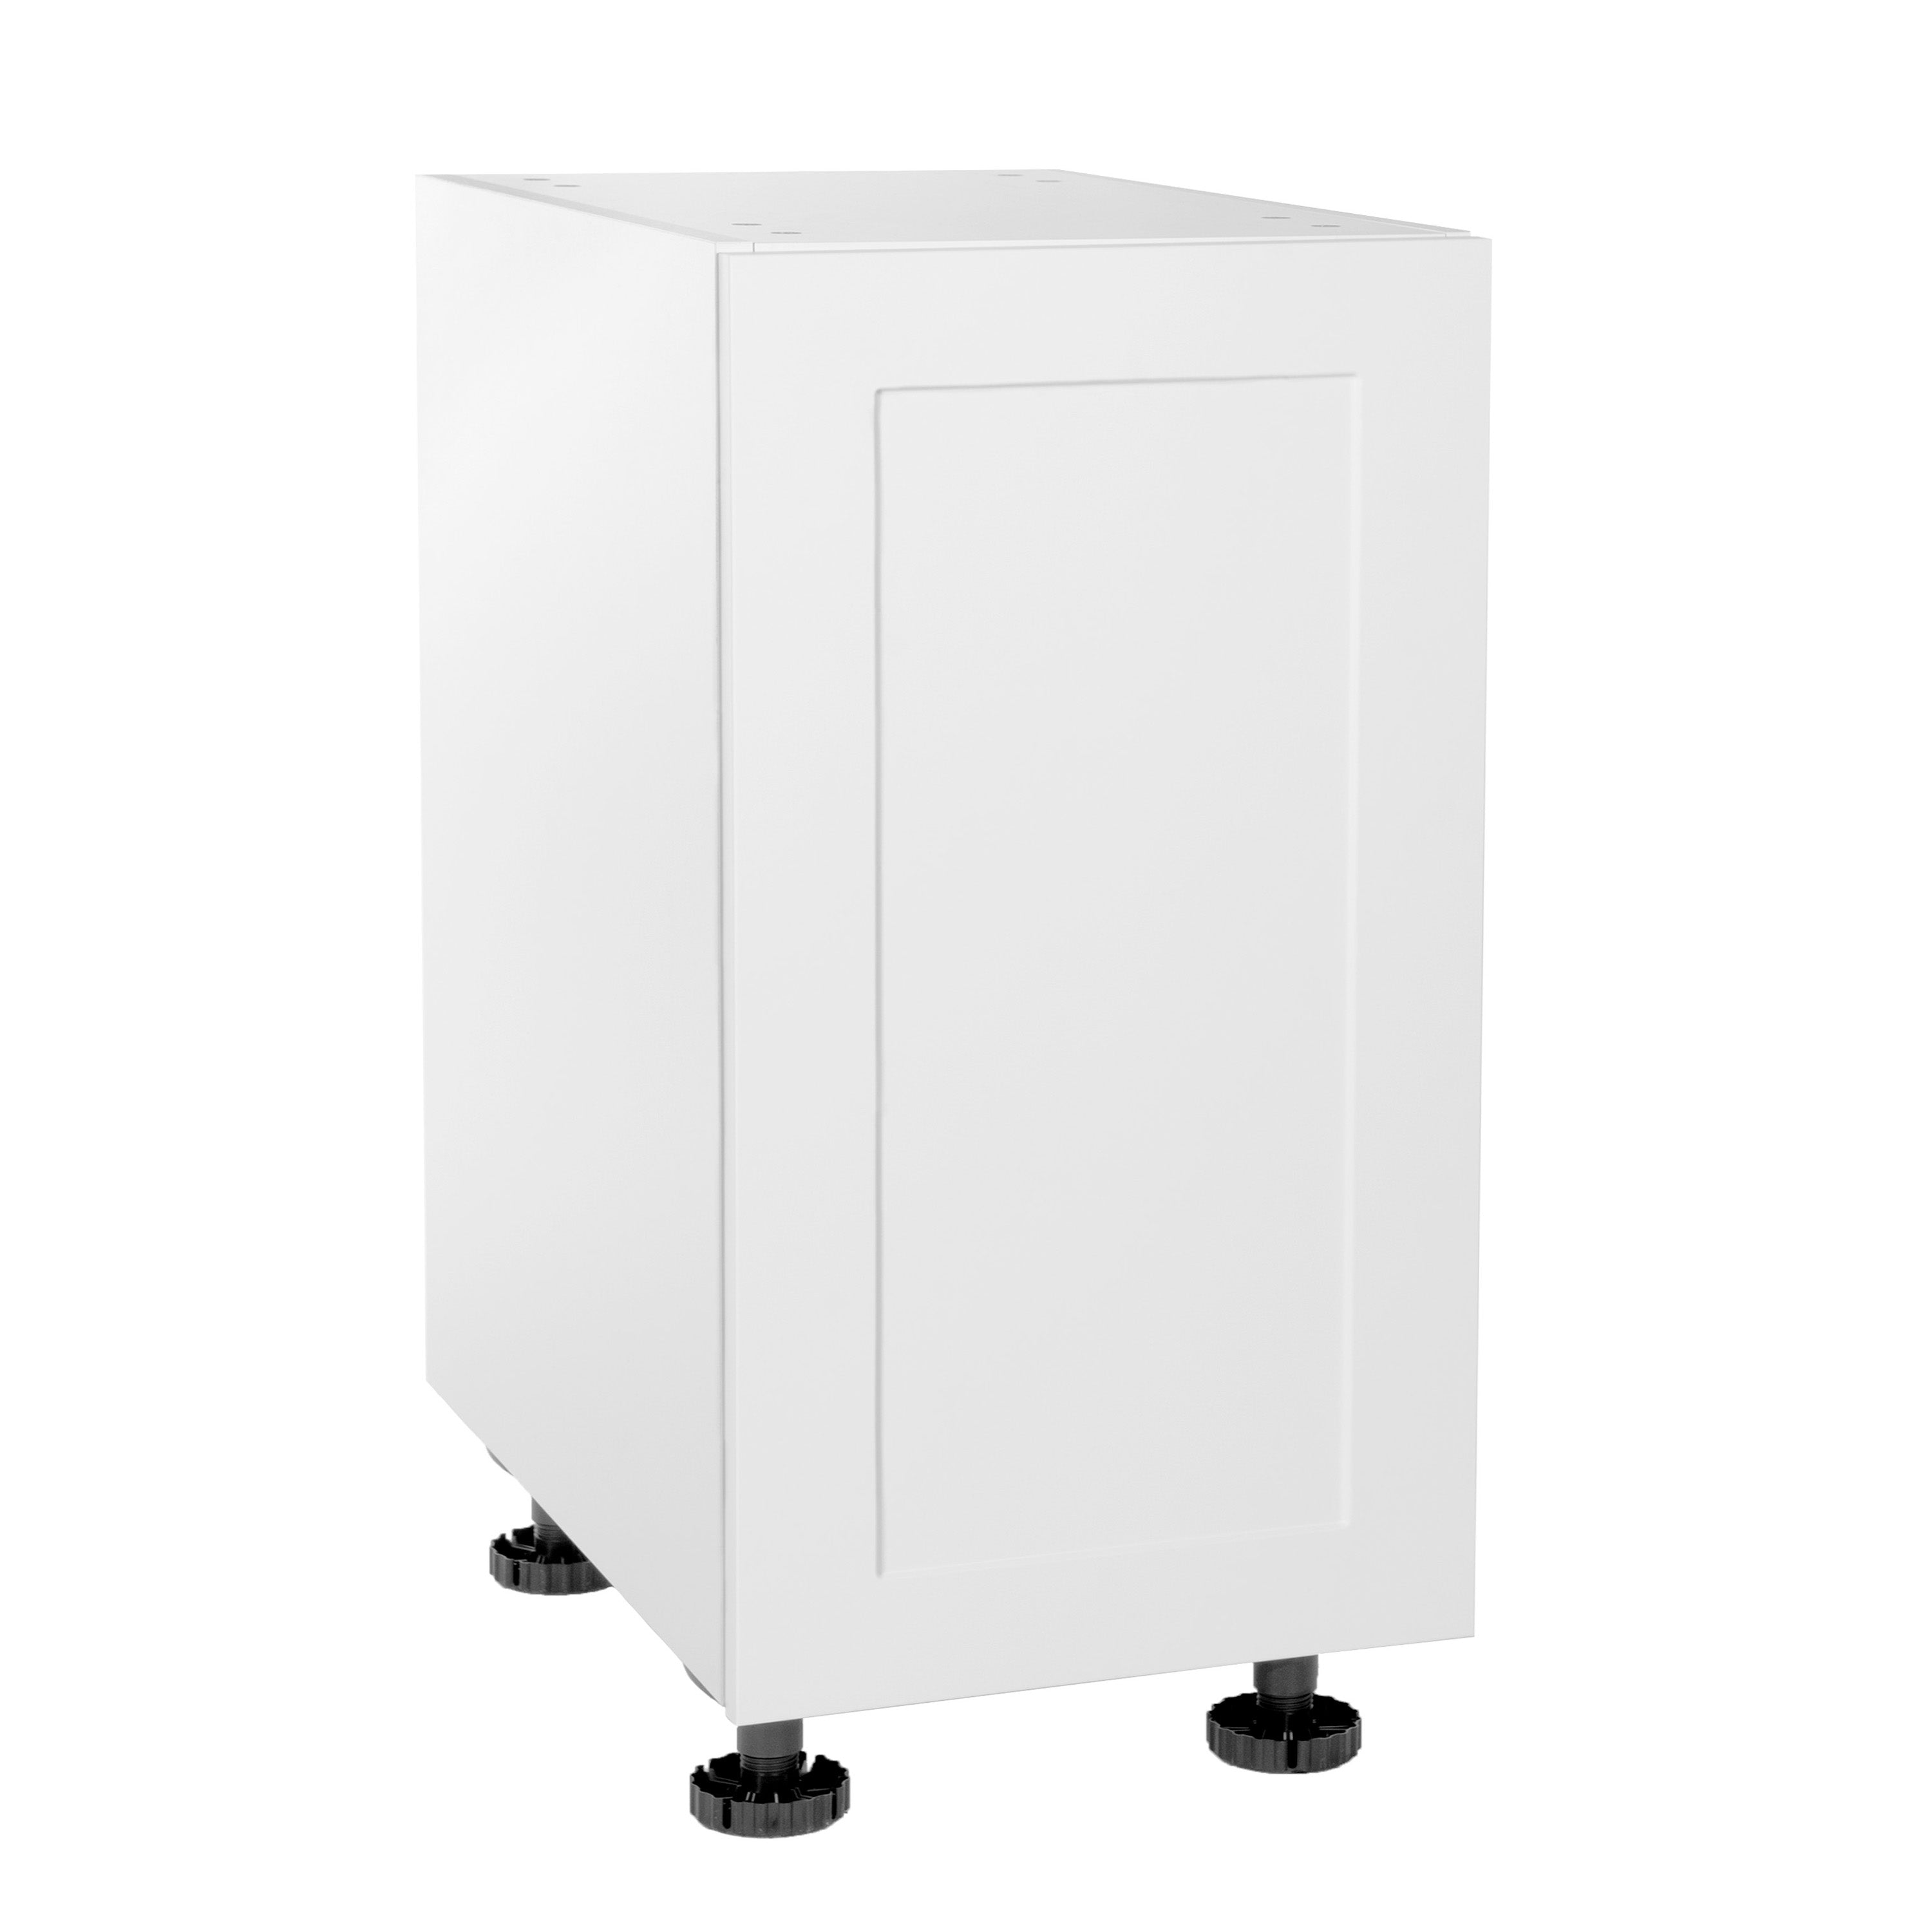 Quick Assemble Modern Style with Soft Close, 21 in White Shaker Base Kitchen Cabinet (21 in W x 24 in D x 34.50 in H)